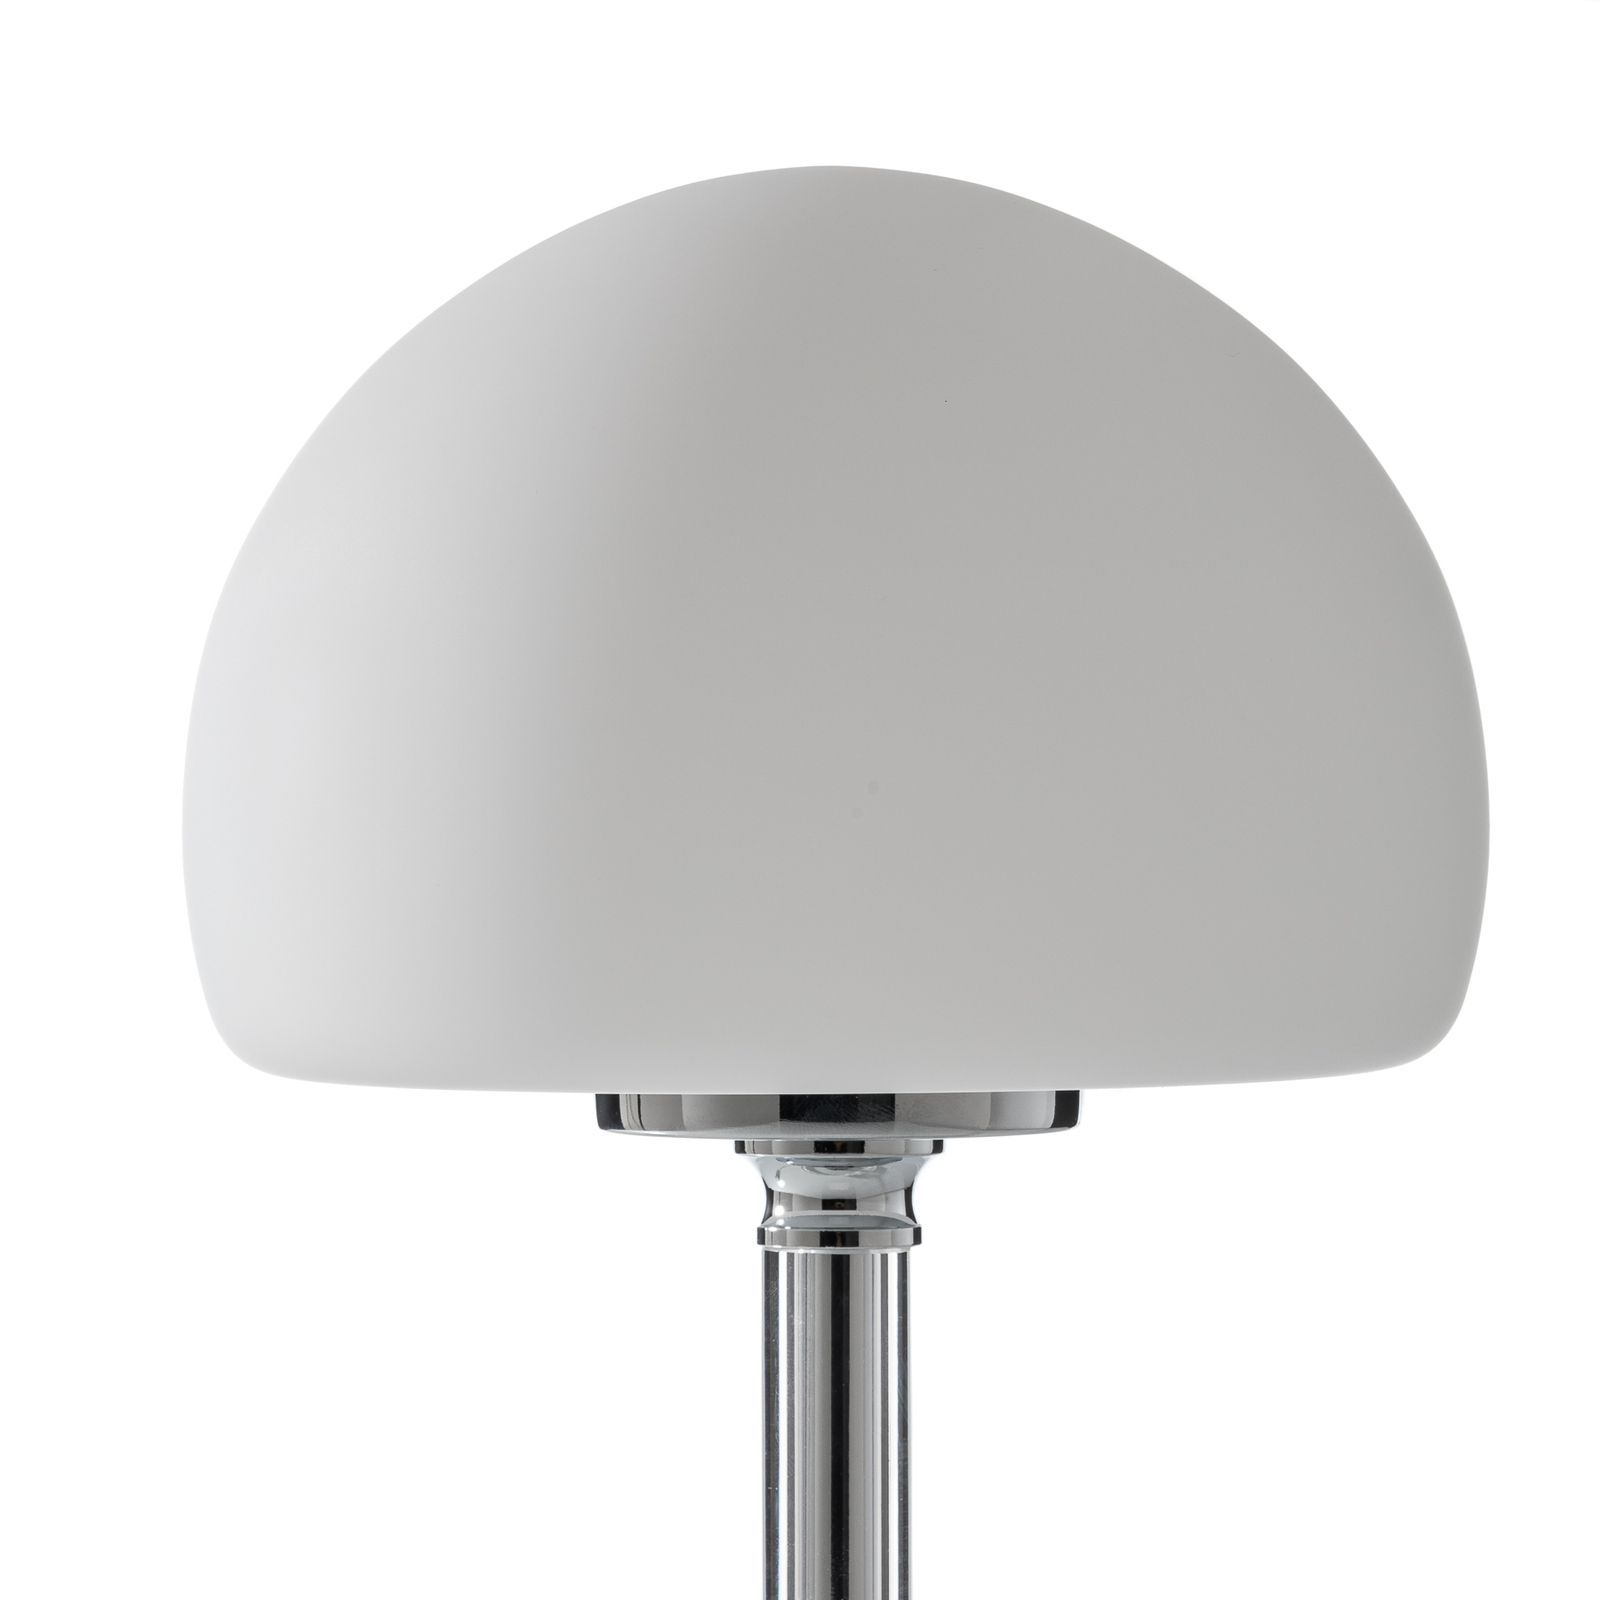 Ancilla - chrome-plated LED table lamp with dimmer